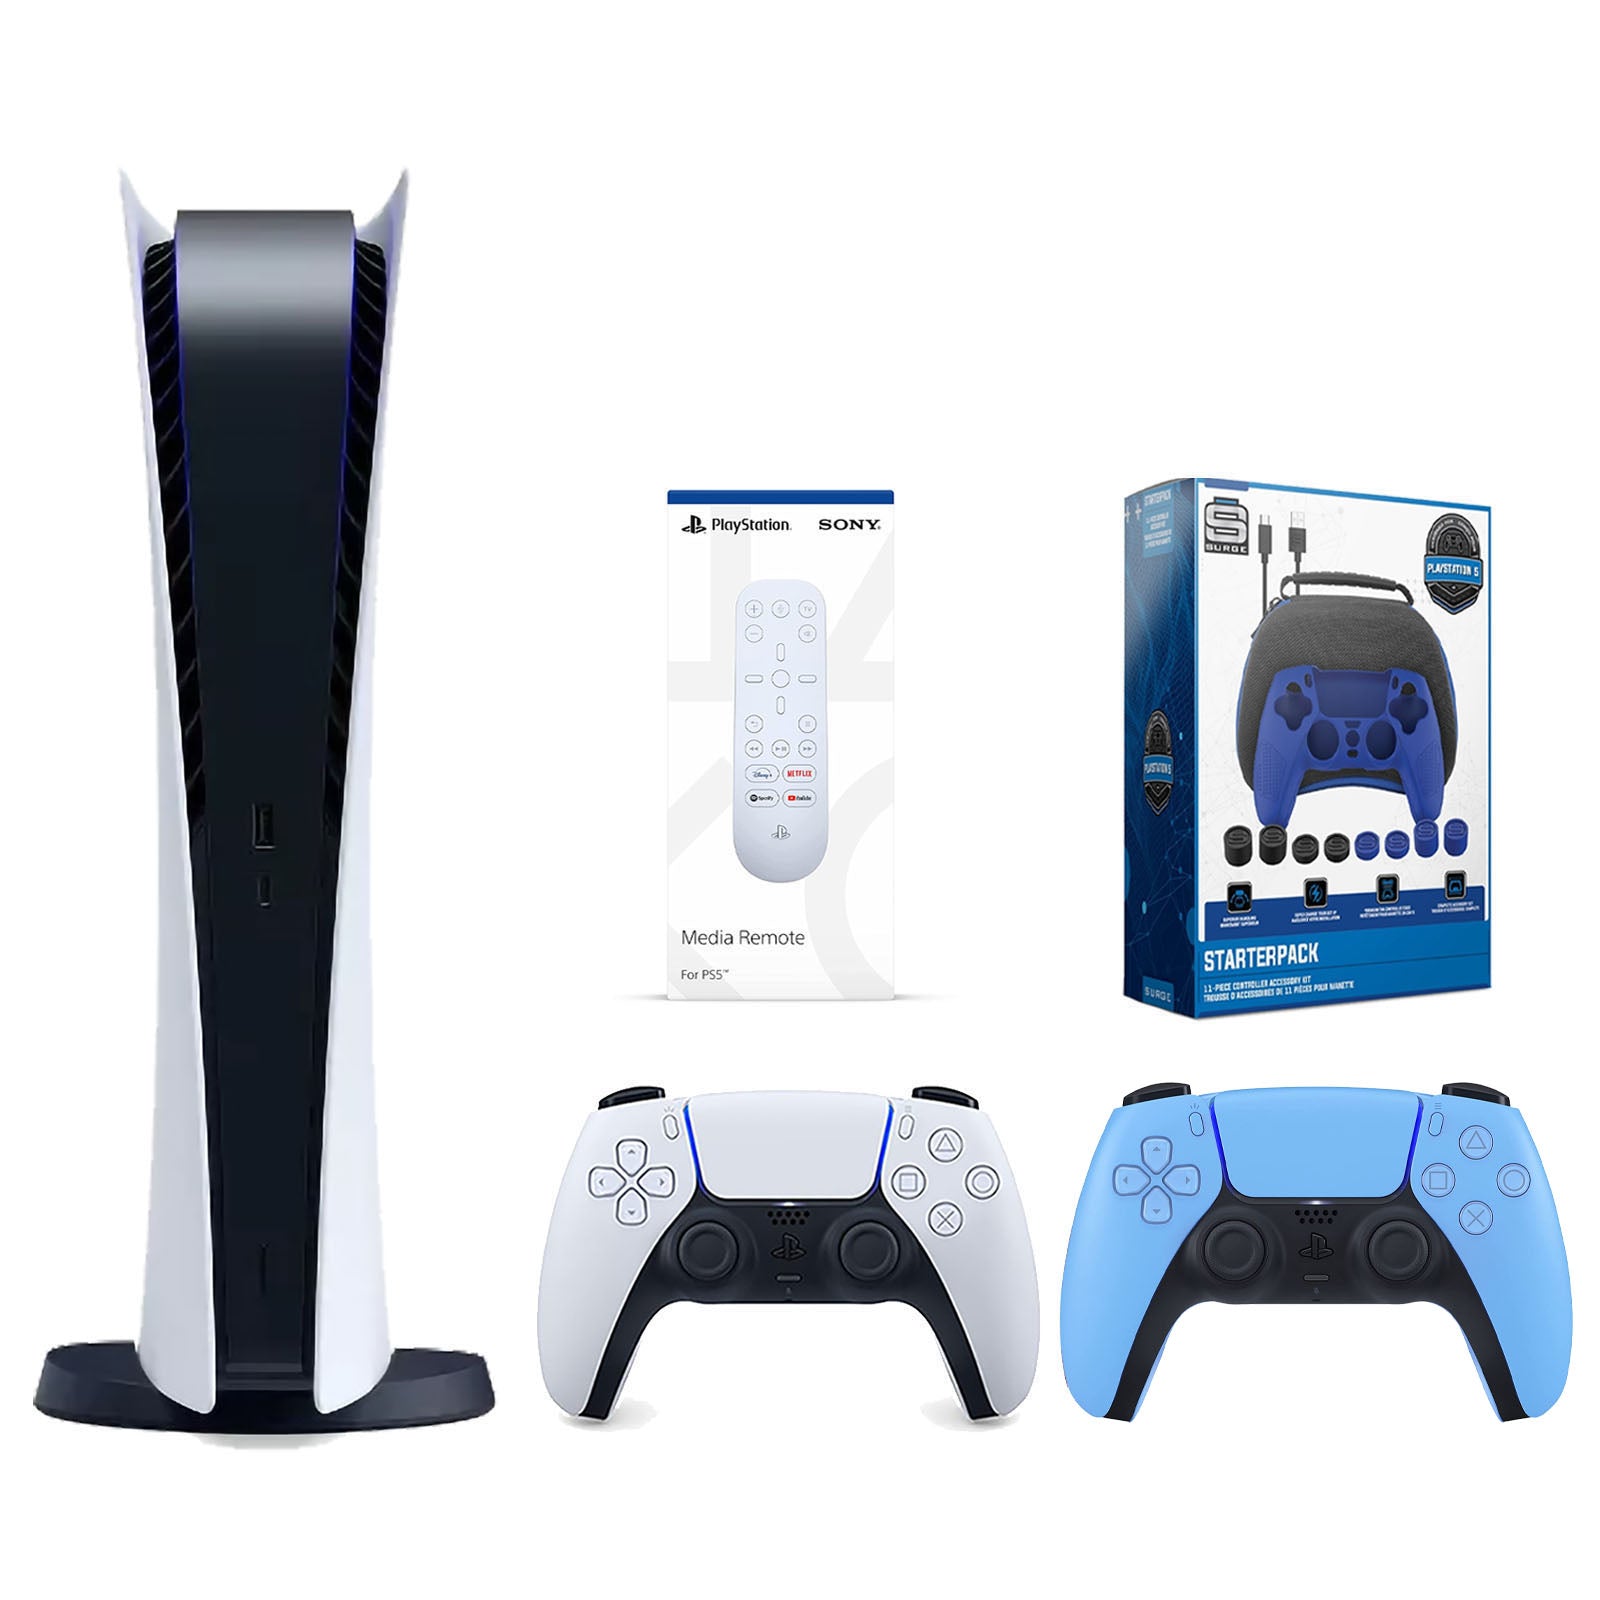 Sony Playstation 5 Digital Edition Console with Extra Blue Controller, Media Remote and Surge Pro Gamer Starter Pack 11-Piece Accessory Bundle - Pro-Distributing